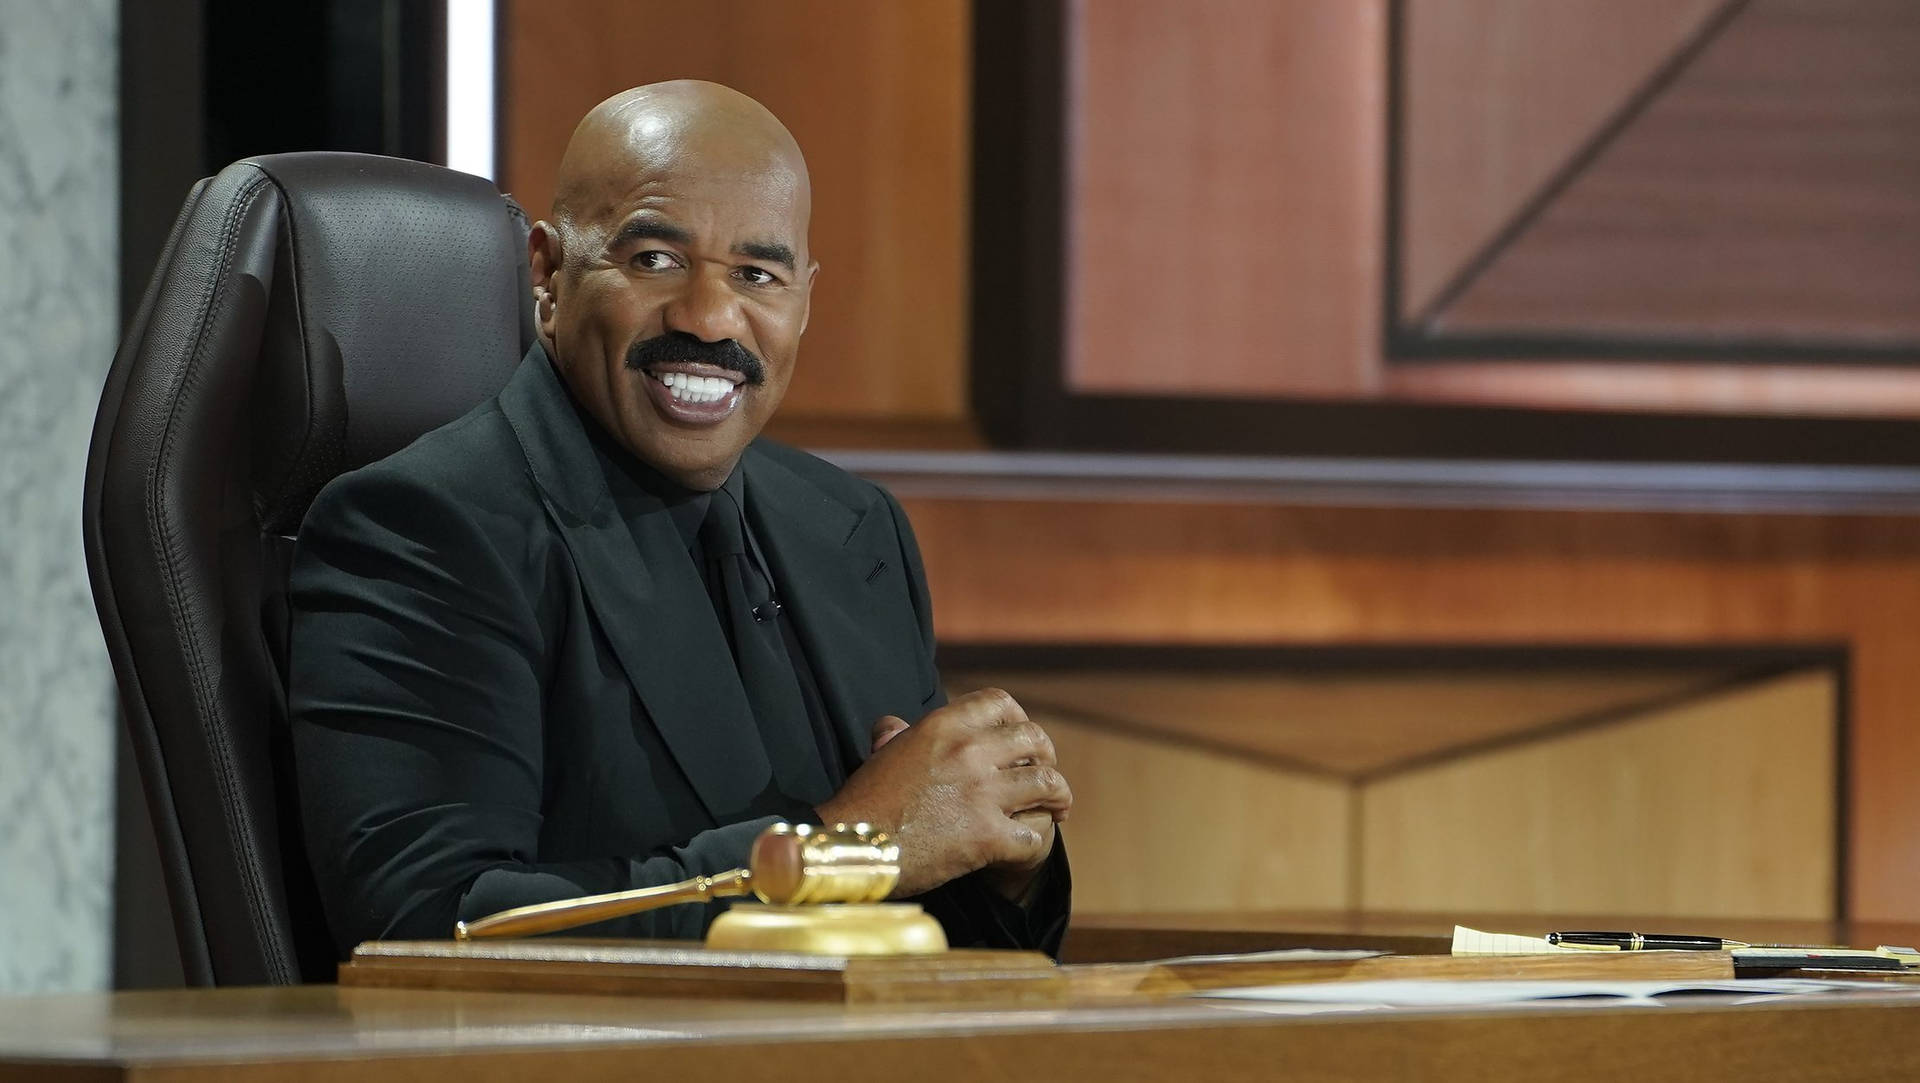 Steve Harvey Portraying Authority In A Classy Black Suit Background